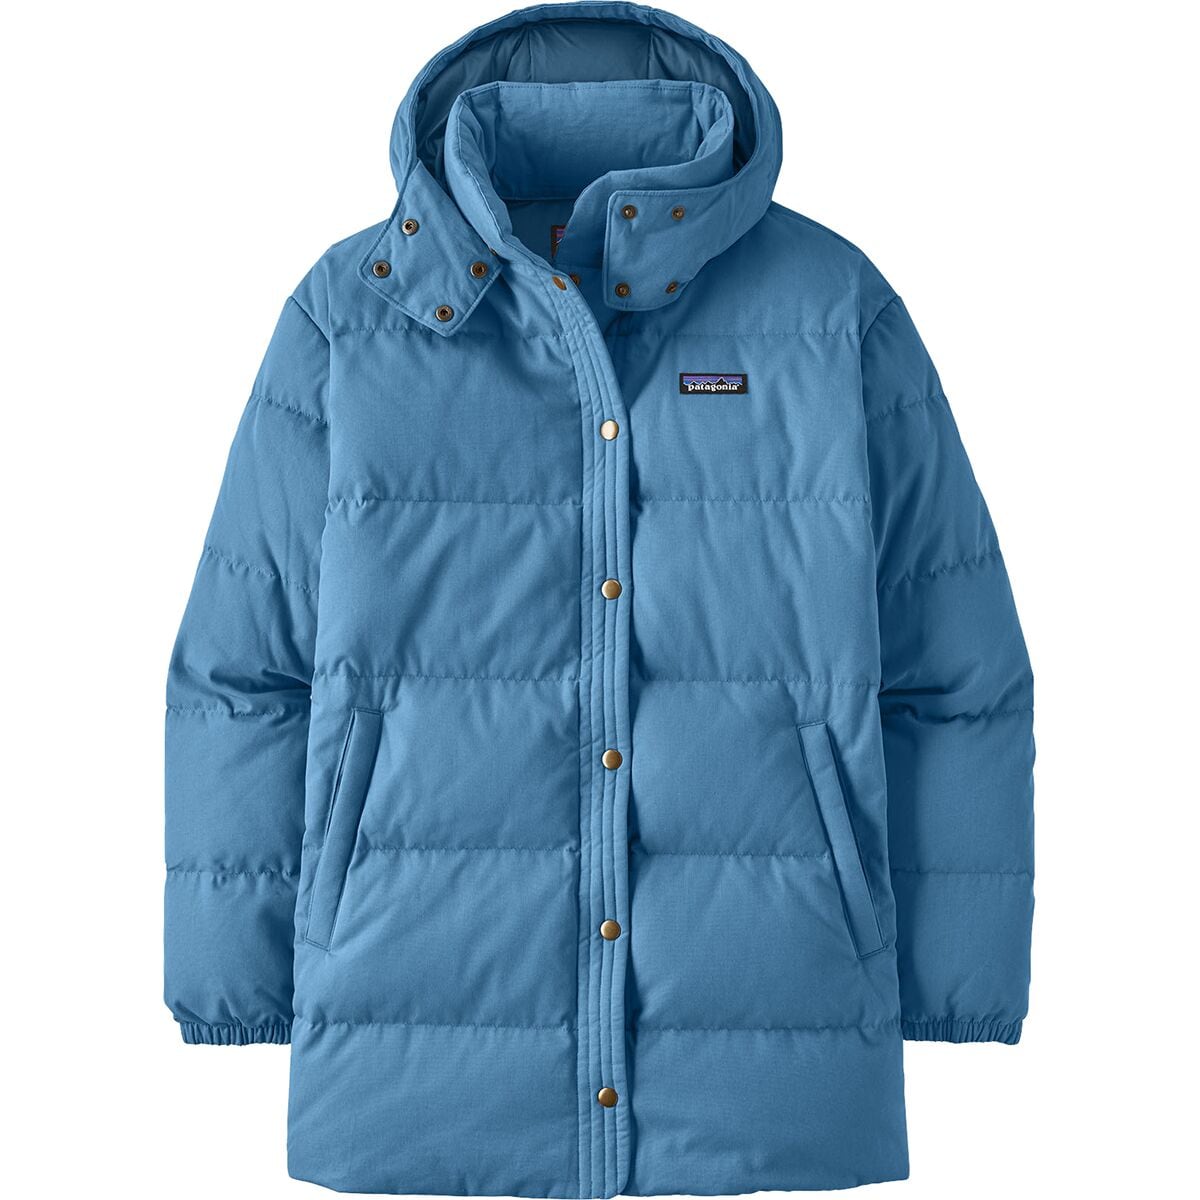 Women's Patagonia on Sale